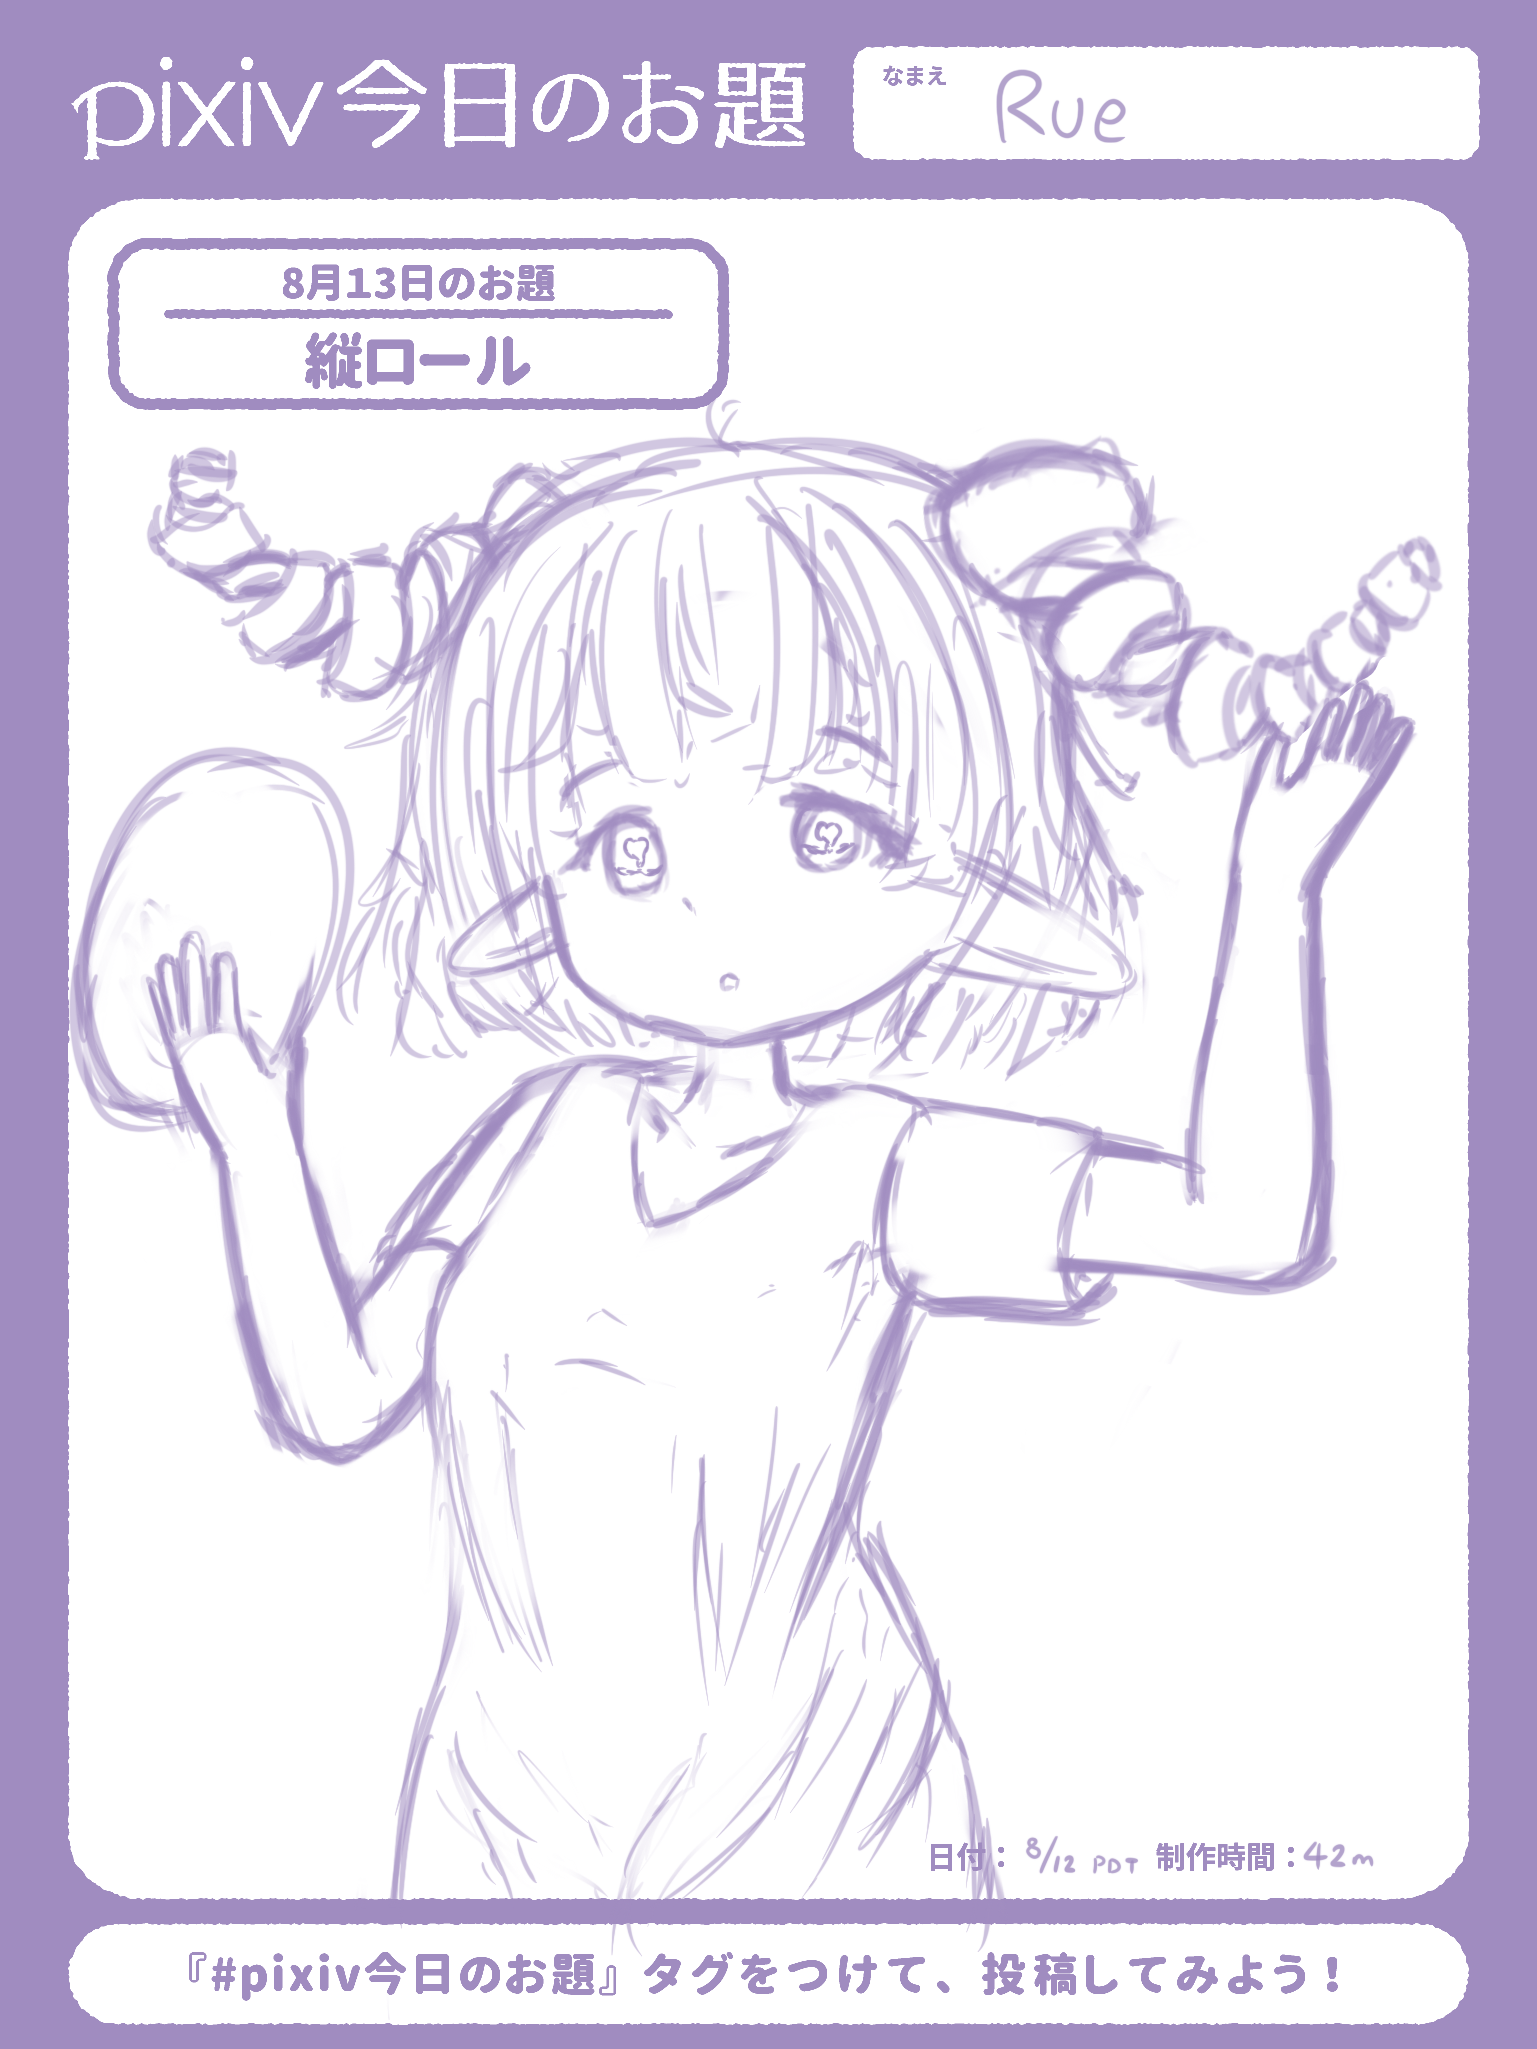 My attempt at sketching today’s pixiv今日のお題-sensei theme of 縦ロール. It’s me in a big t-shirt! I’m holding a mirror in one hand and holding my other hand up to one of my ringlets, which is in the same position as my usual (non-ringlet) sidetails, and floating the same way.